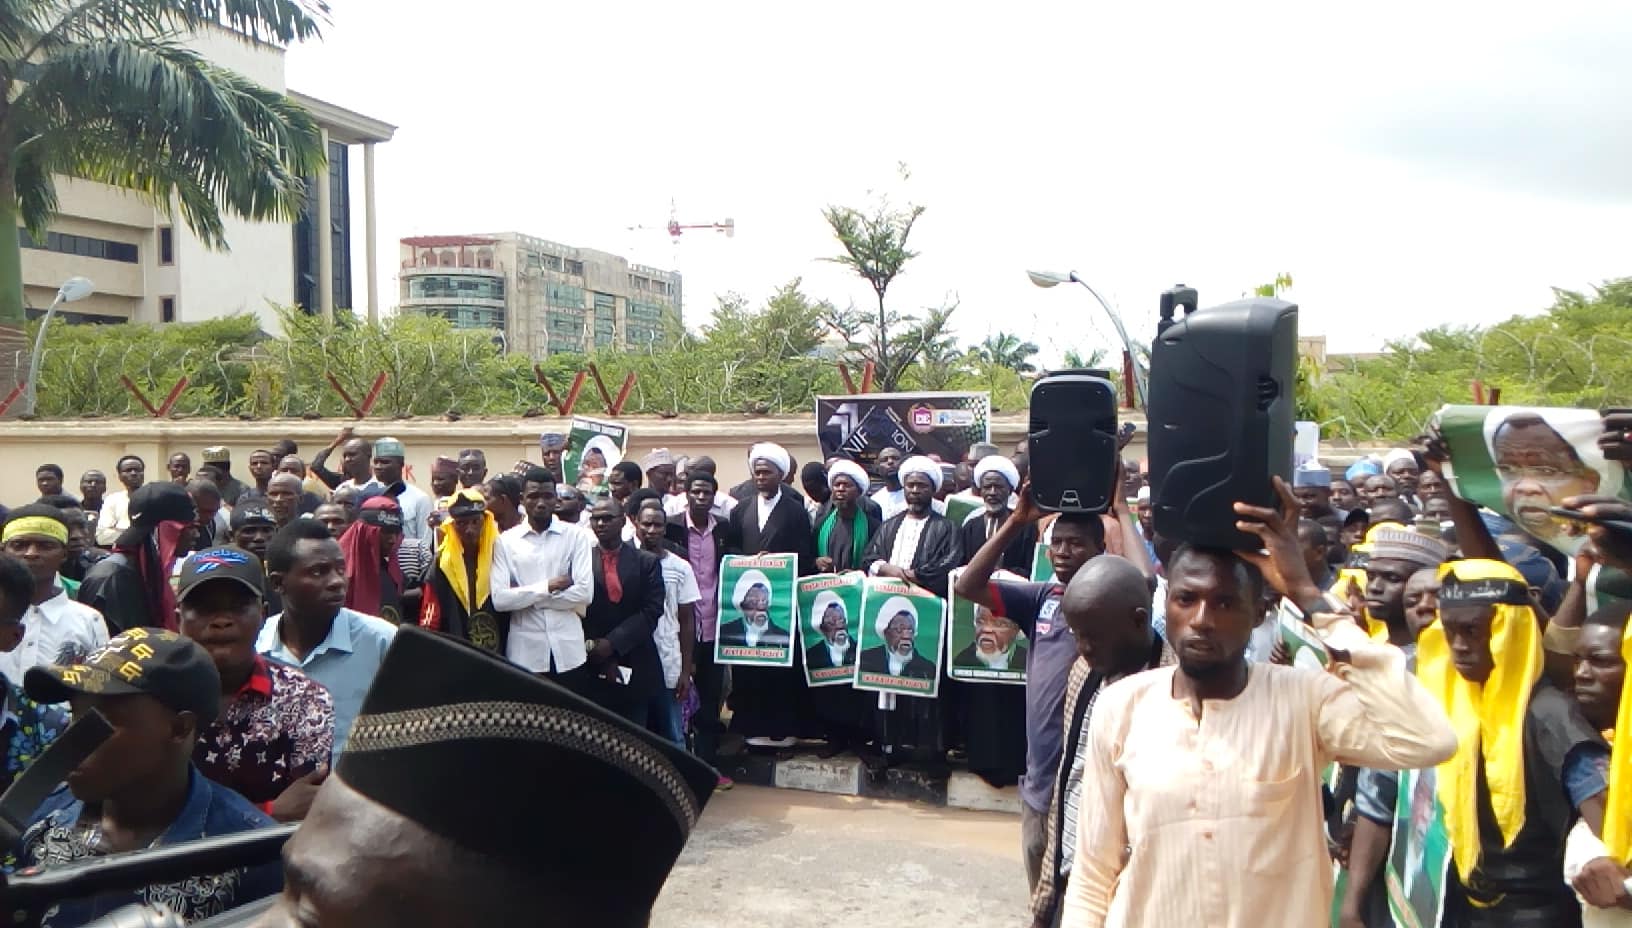 free zakzaky protest in abuja on 4th oct 2018